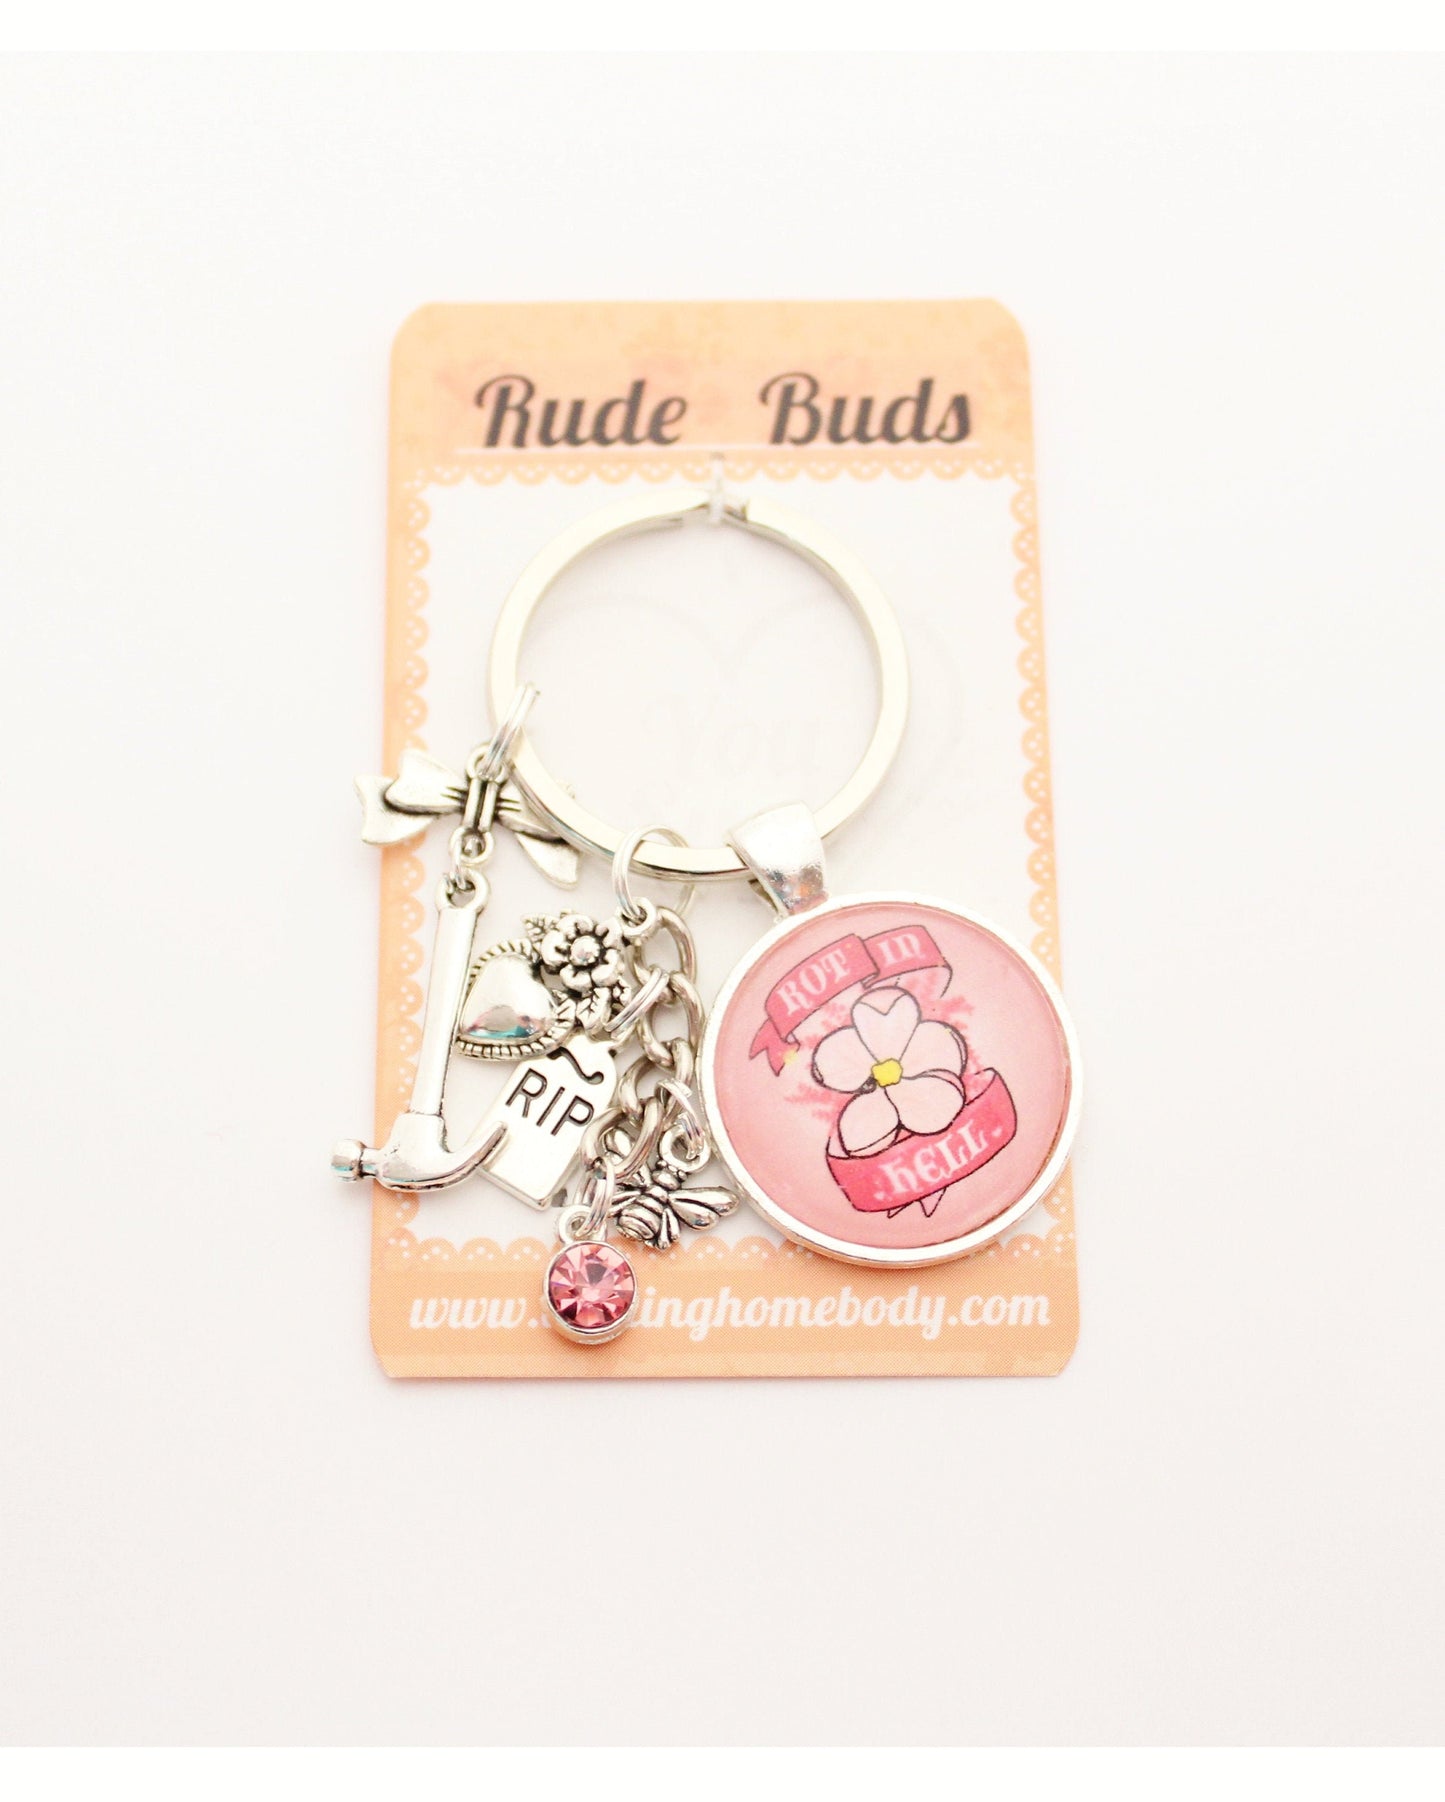 Rot in Hell Rude Buds Key Chain. Funny Sarcastic Floral Accessory. Pink Pastel Cherry Blossom Flower Keychain. Bridesmaids Gifts for Her.